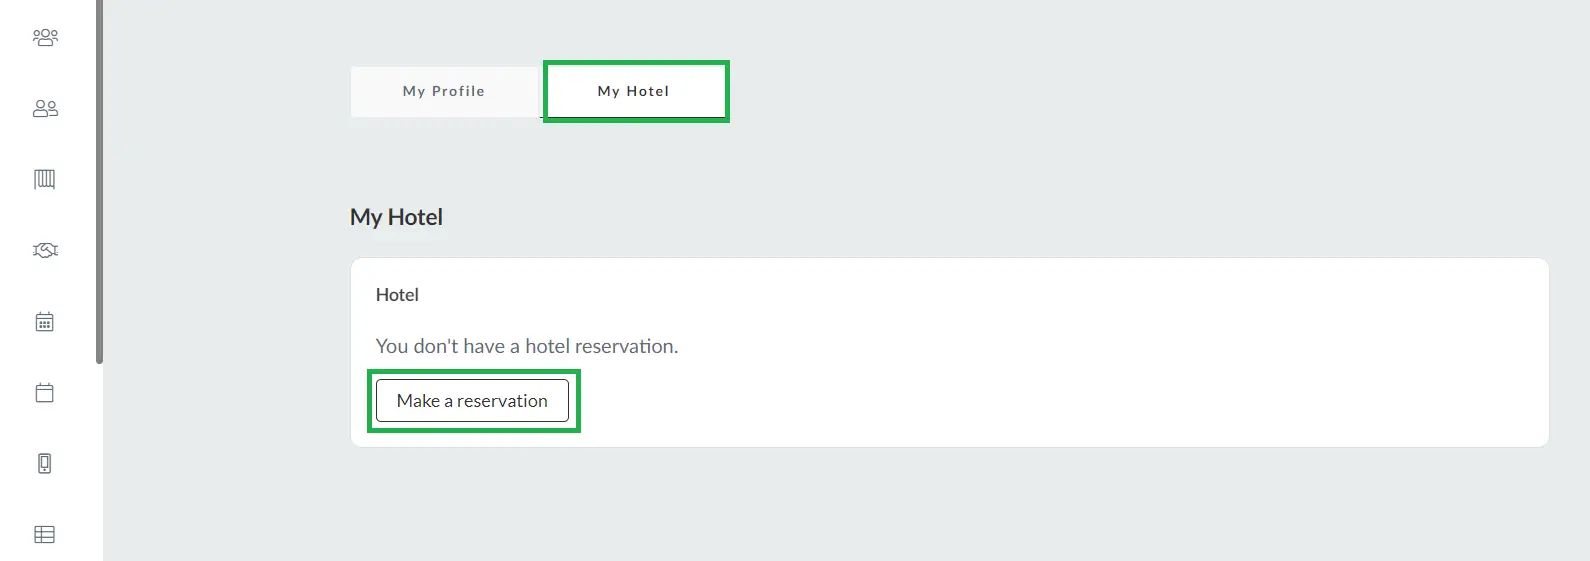 Making hotel reservations